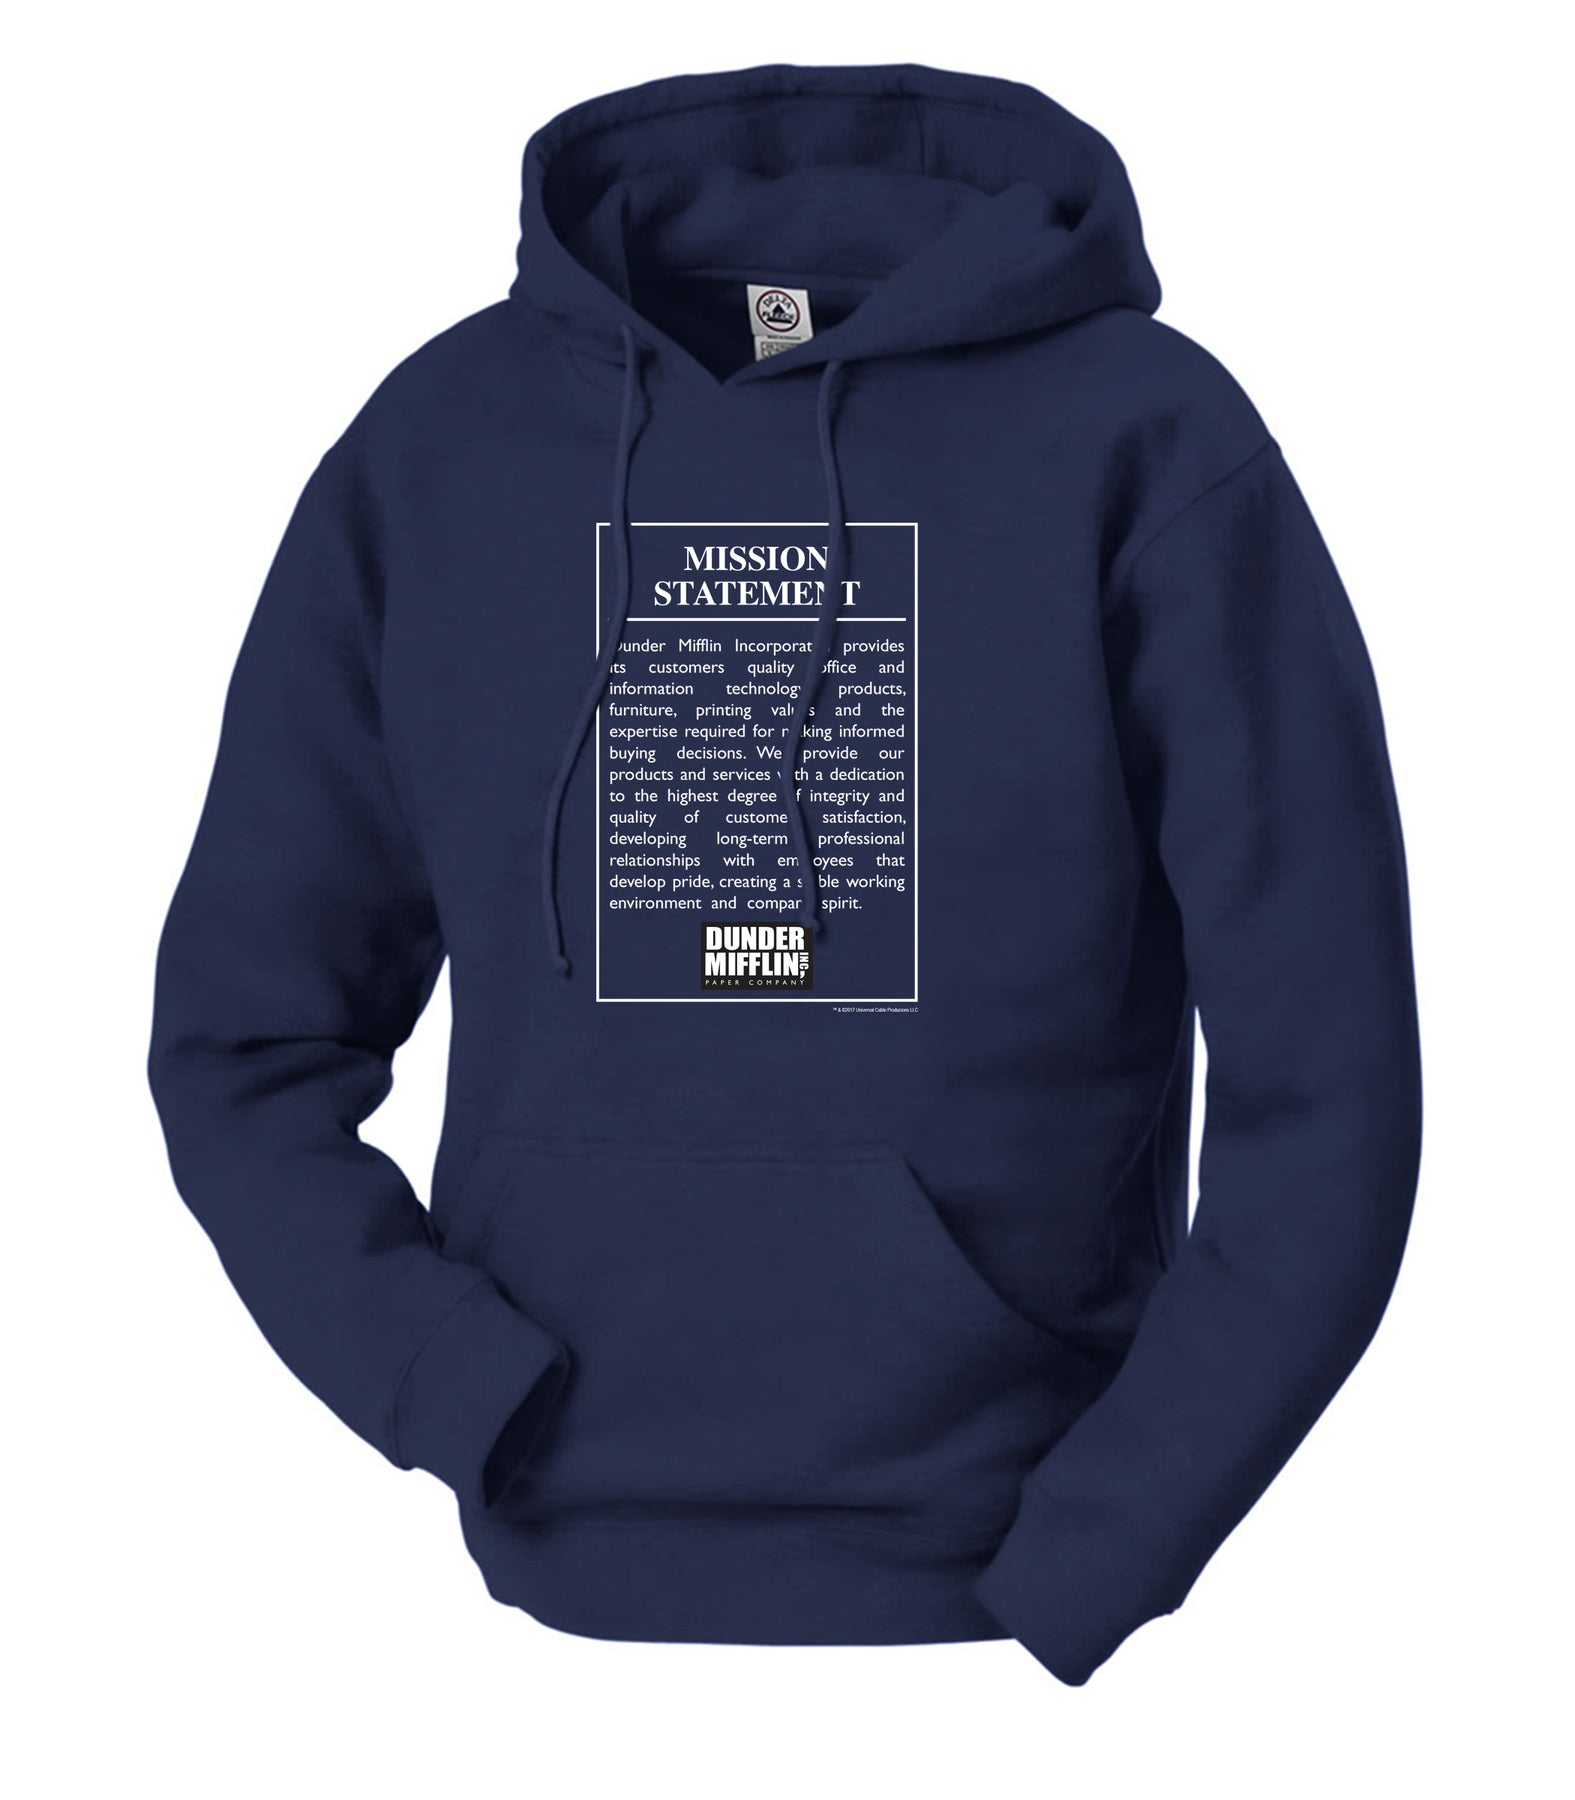 The Office Dunder Mission Statement Hooded Sweatshirt | Store